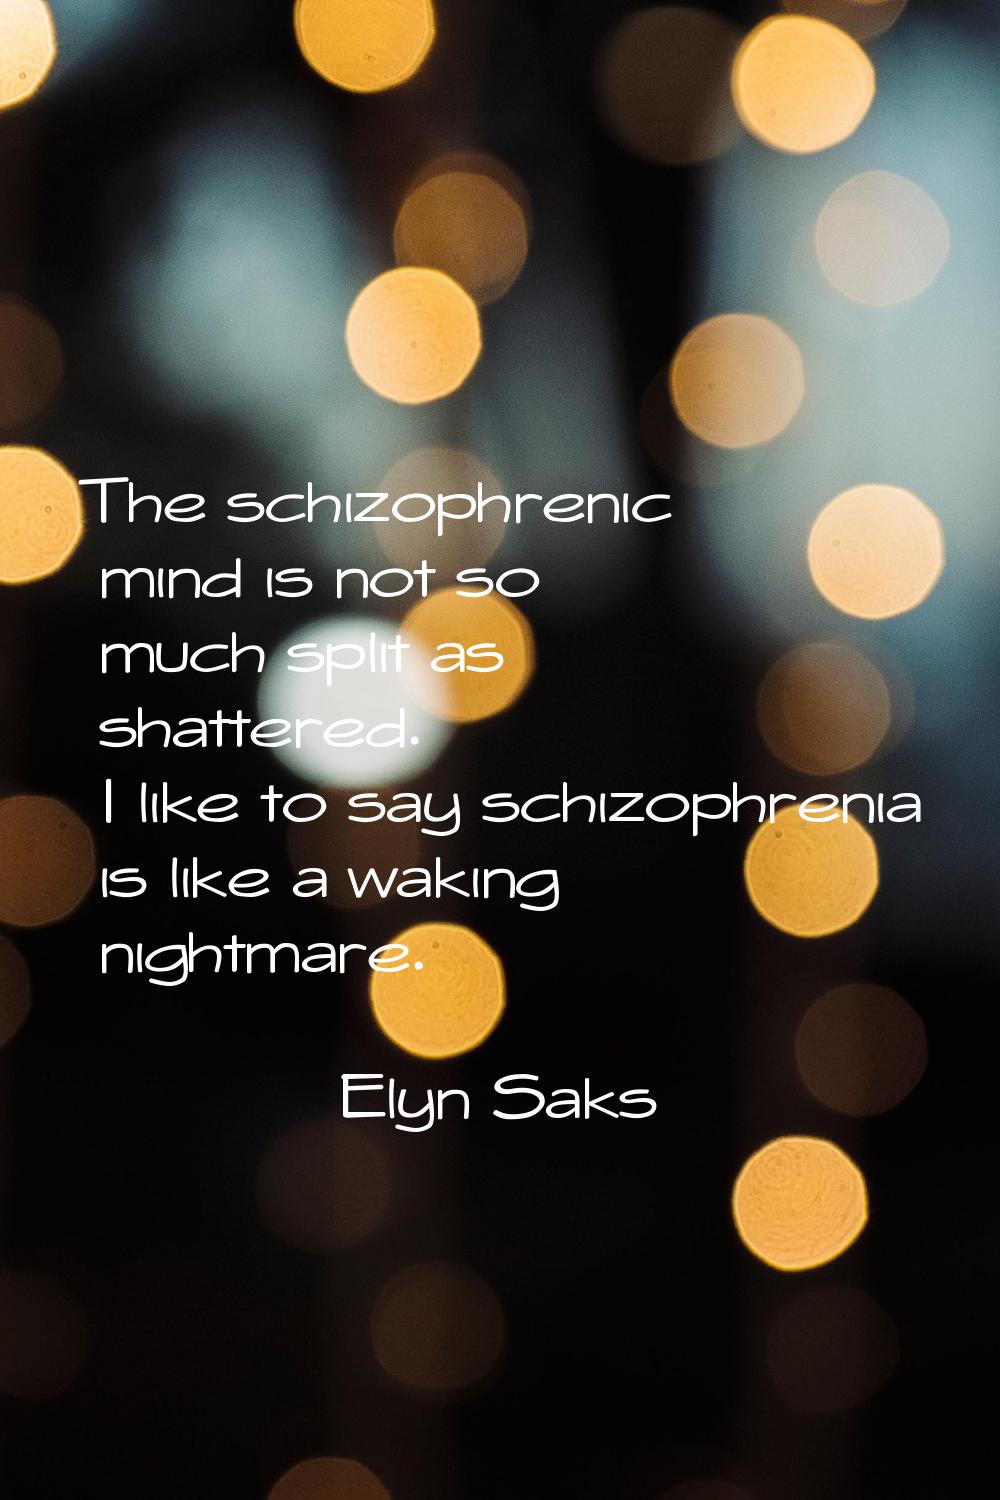 The schizophrenic mind is not so much split as shattered. I like to say schizophrenia is like a wak